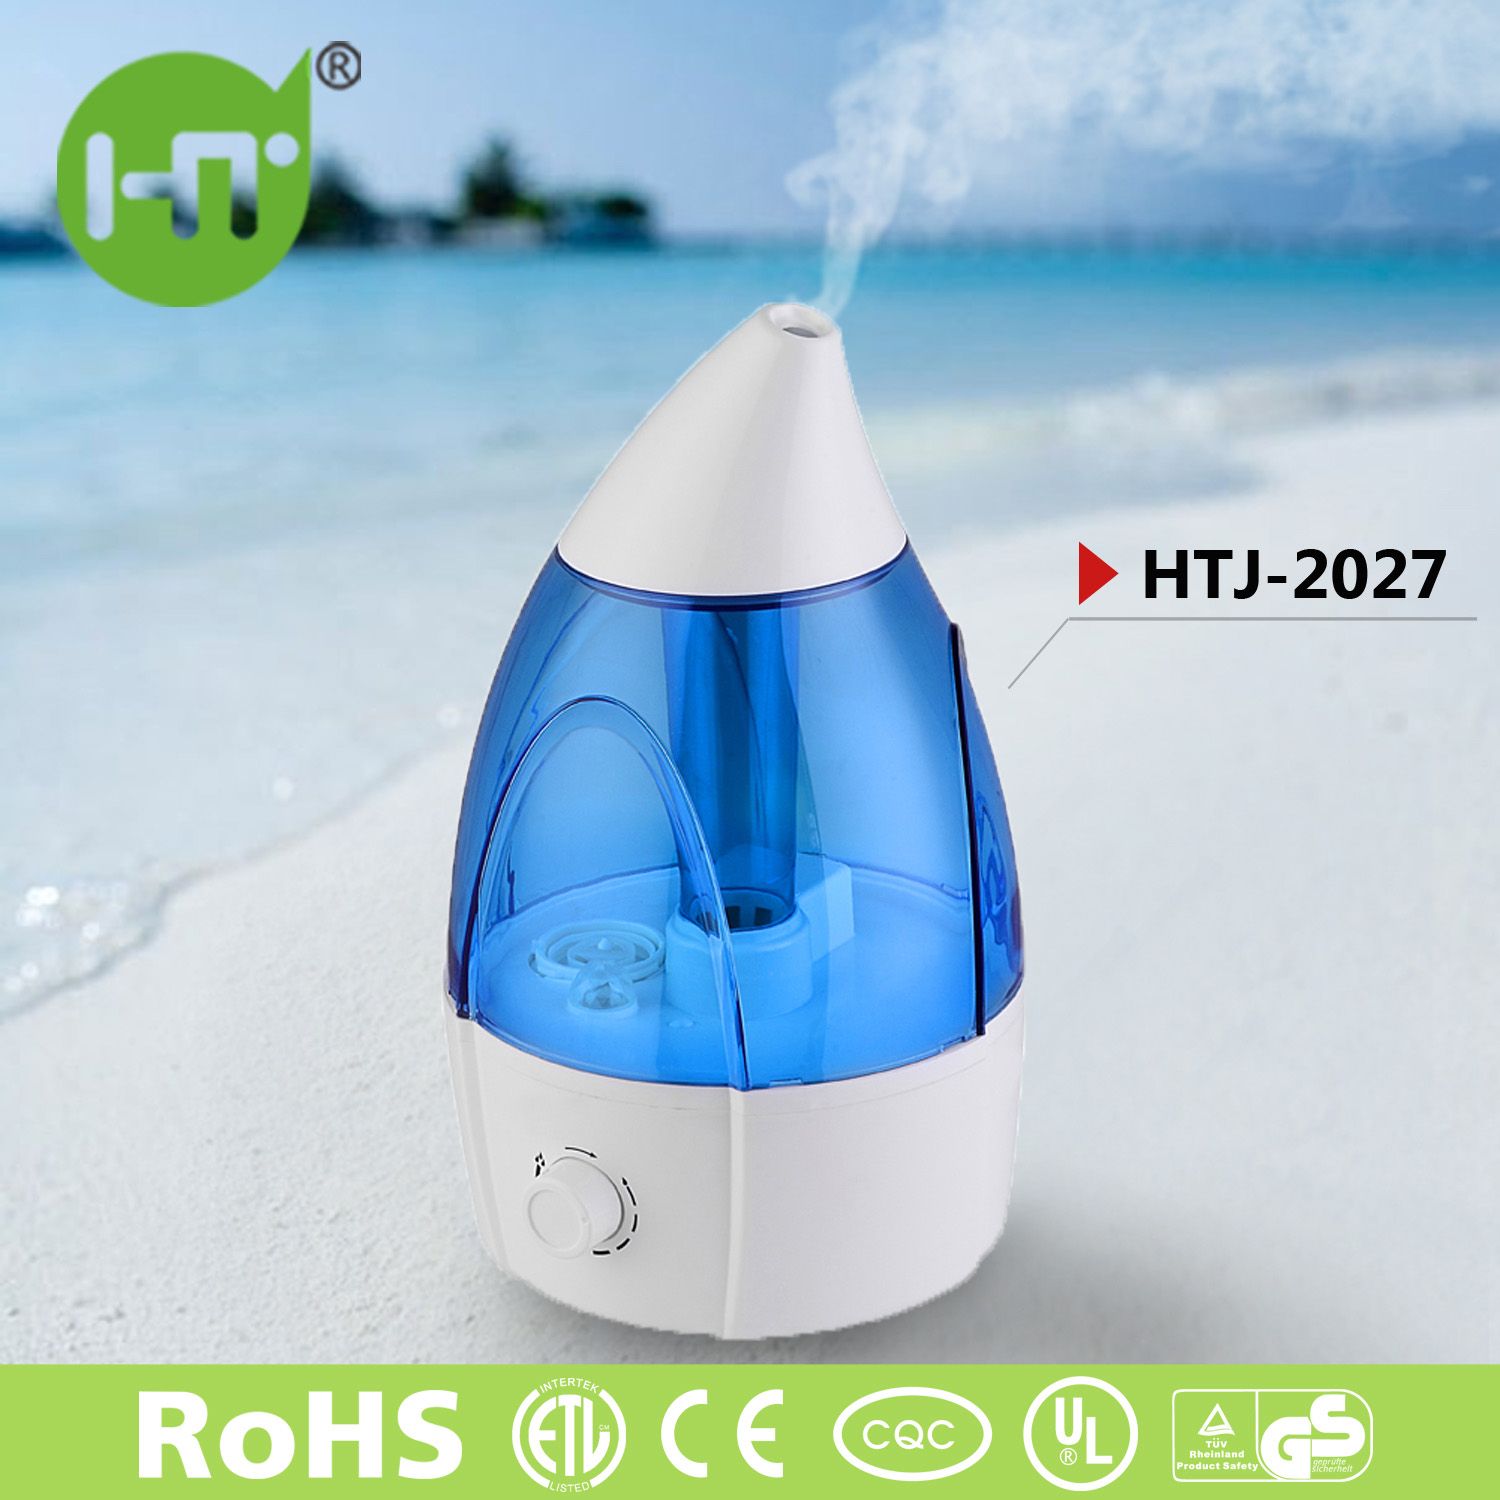 HTJ-2027B 3.0L LED Cool Mist Spray Essential Oil Available Humidifier